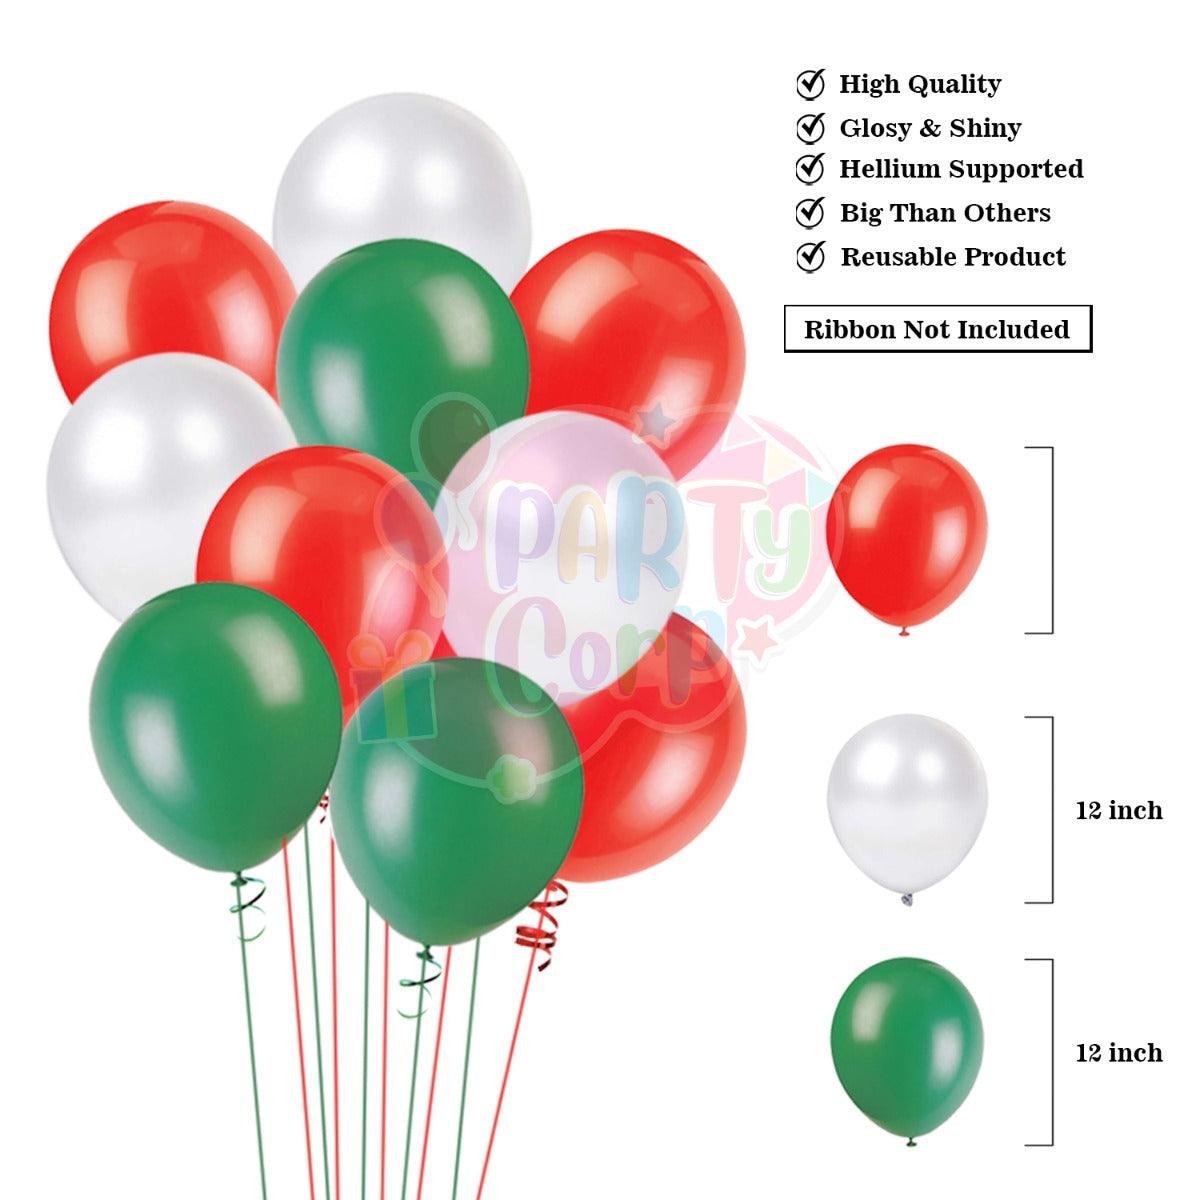 PartyCorp Merry Christmas Decoration Kit Combo 87 Pcs - Dark Green, Red, White Latex Balloons, Merry Christmas Printed Banner, Santa Foil Balloon, Christmas Tree 4 feet, 4 types of danglers (Stars, Bells, Balls, Gift boxes)